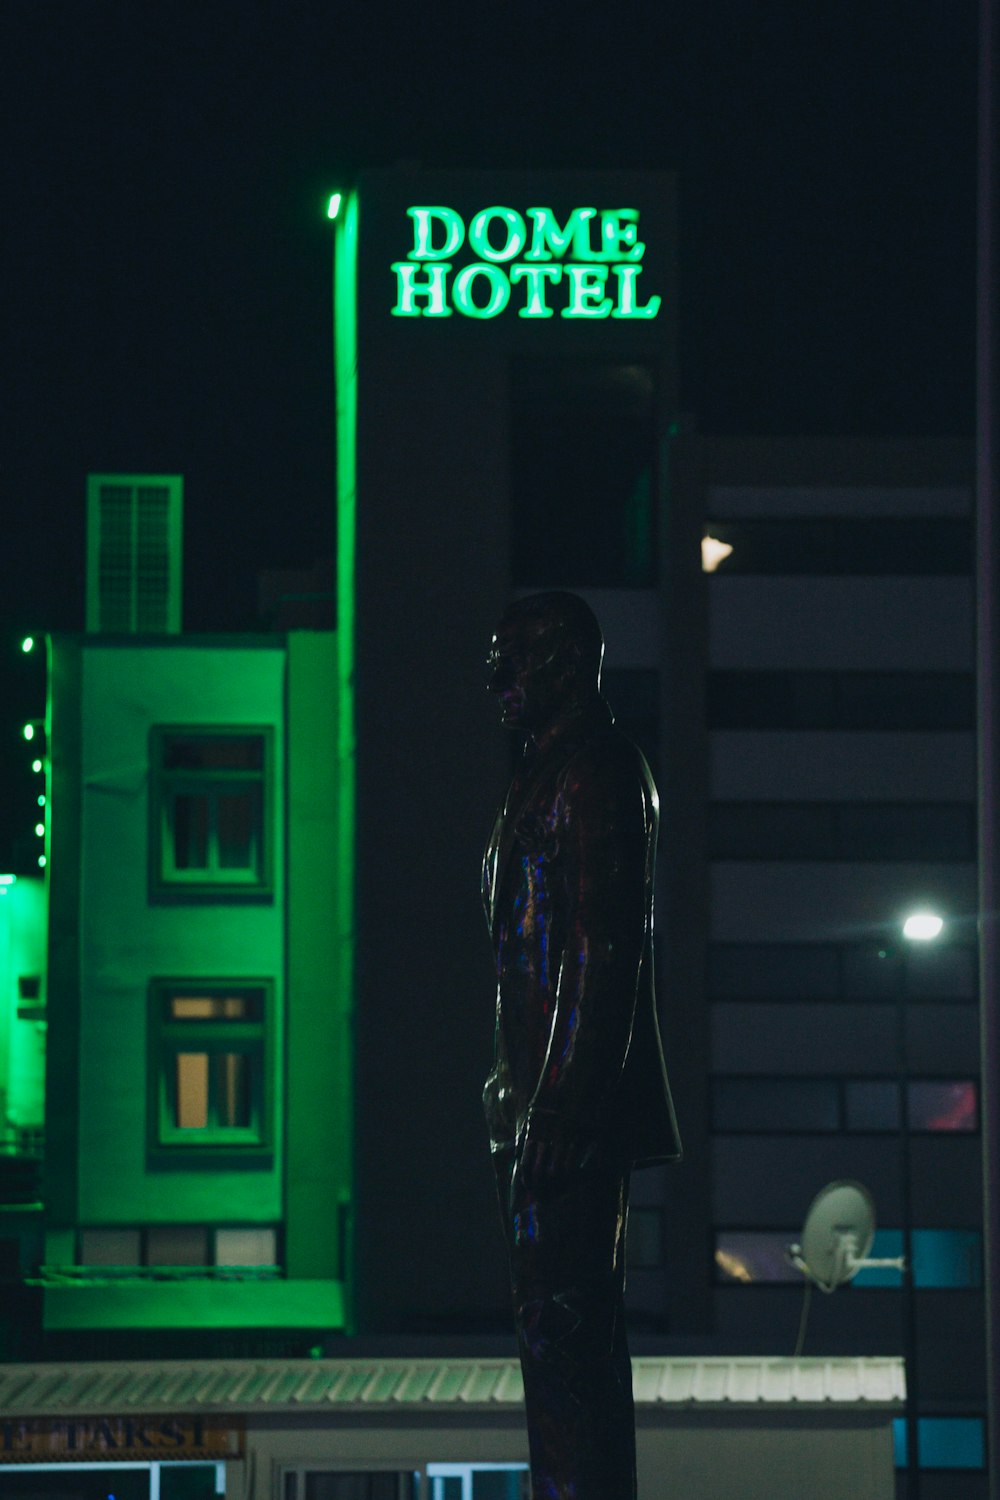 a statue of a person in front of a neon sign